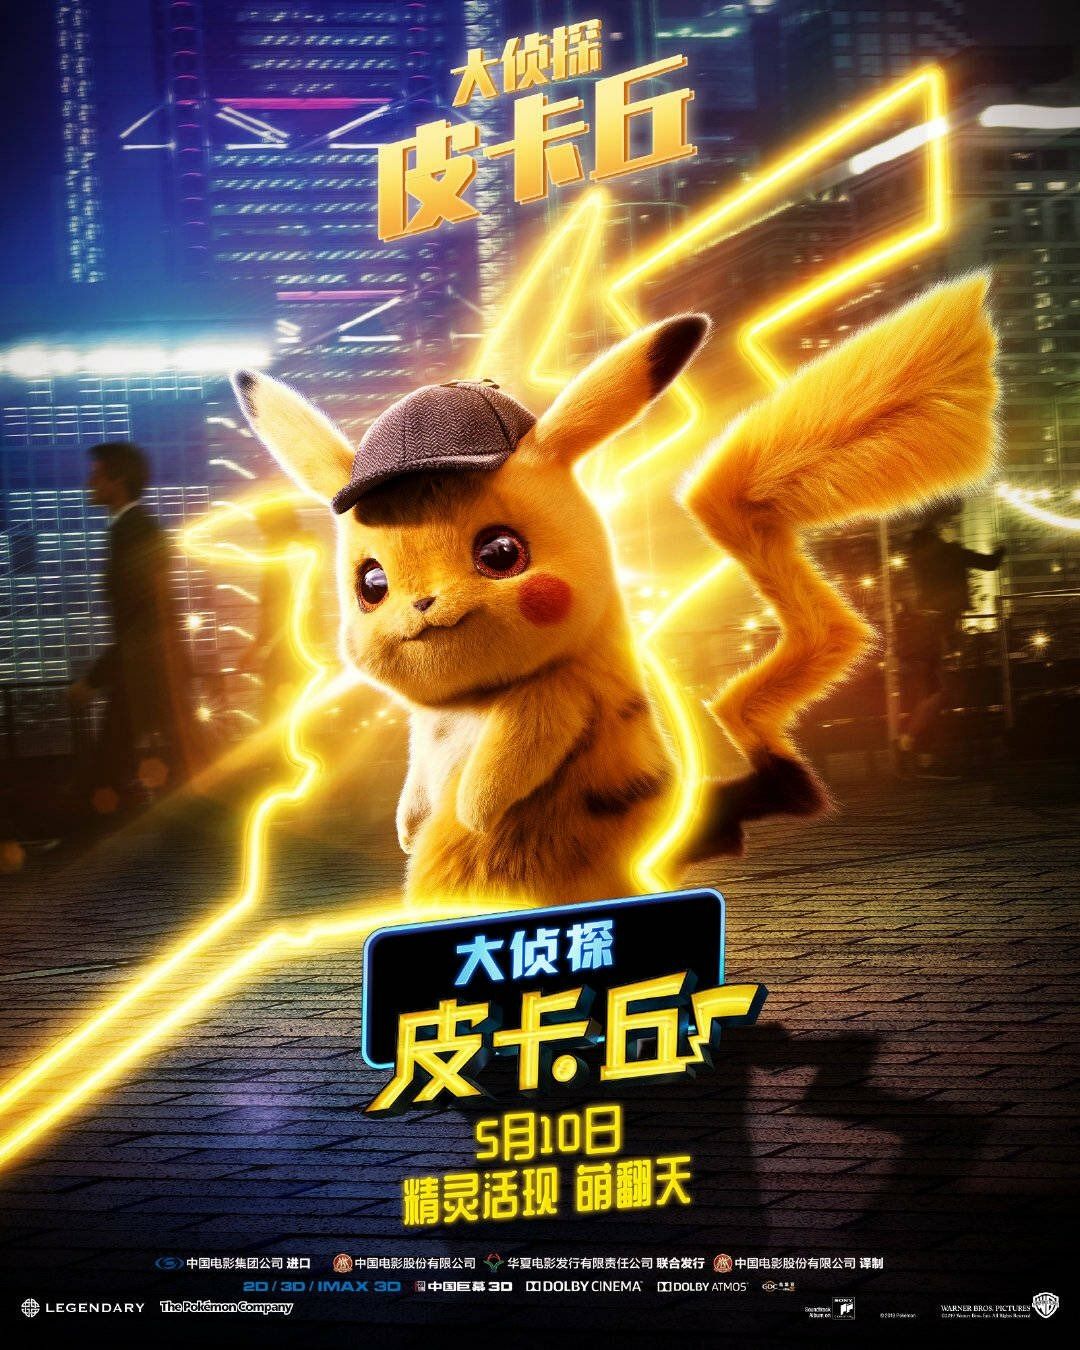 Detective Pikachu character poster #2